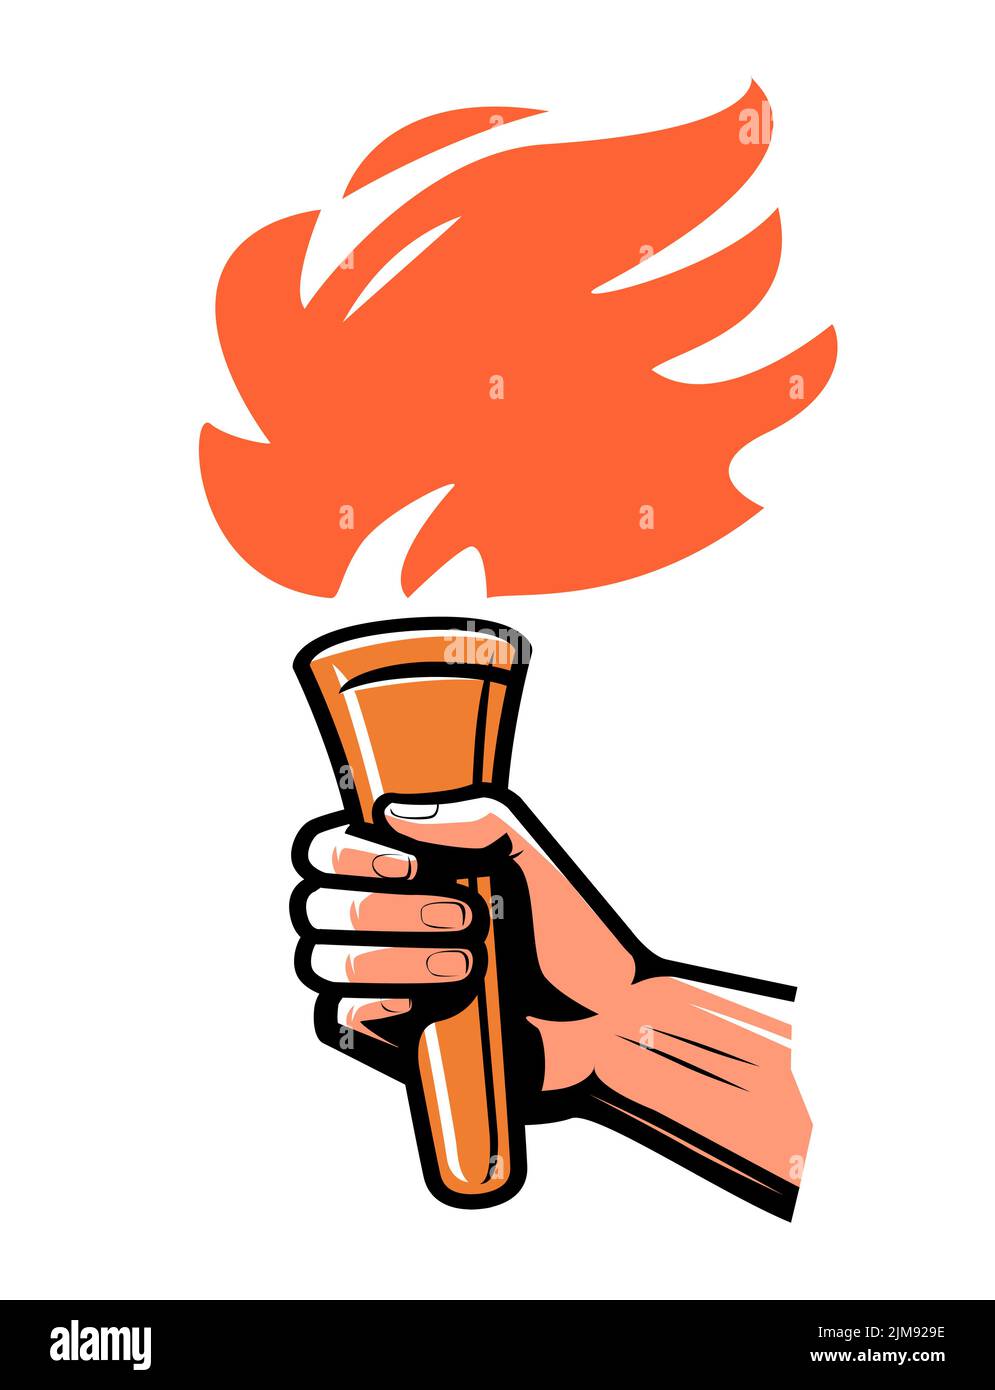 Torch with blazing fire in hand emblem isolated. Flaming torch badge. Symbol of achievement and victory in sports Stock Vector